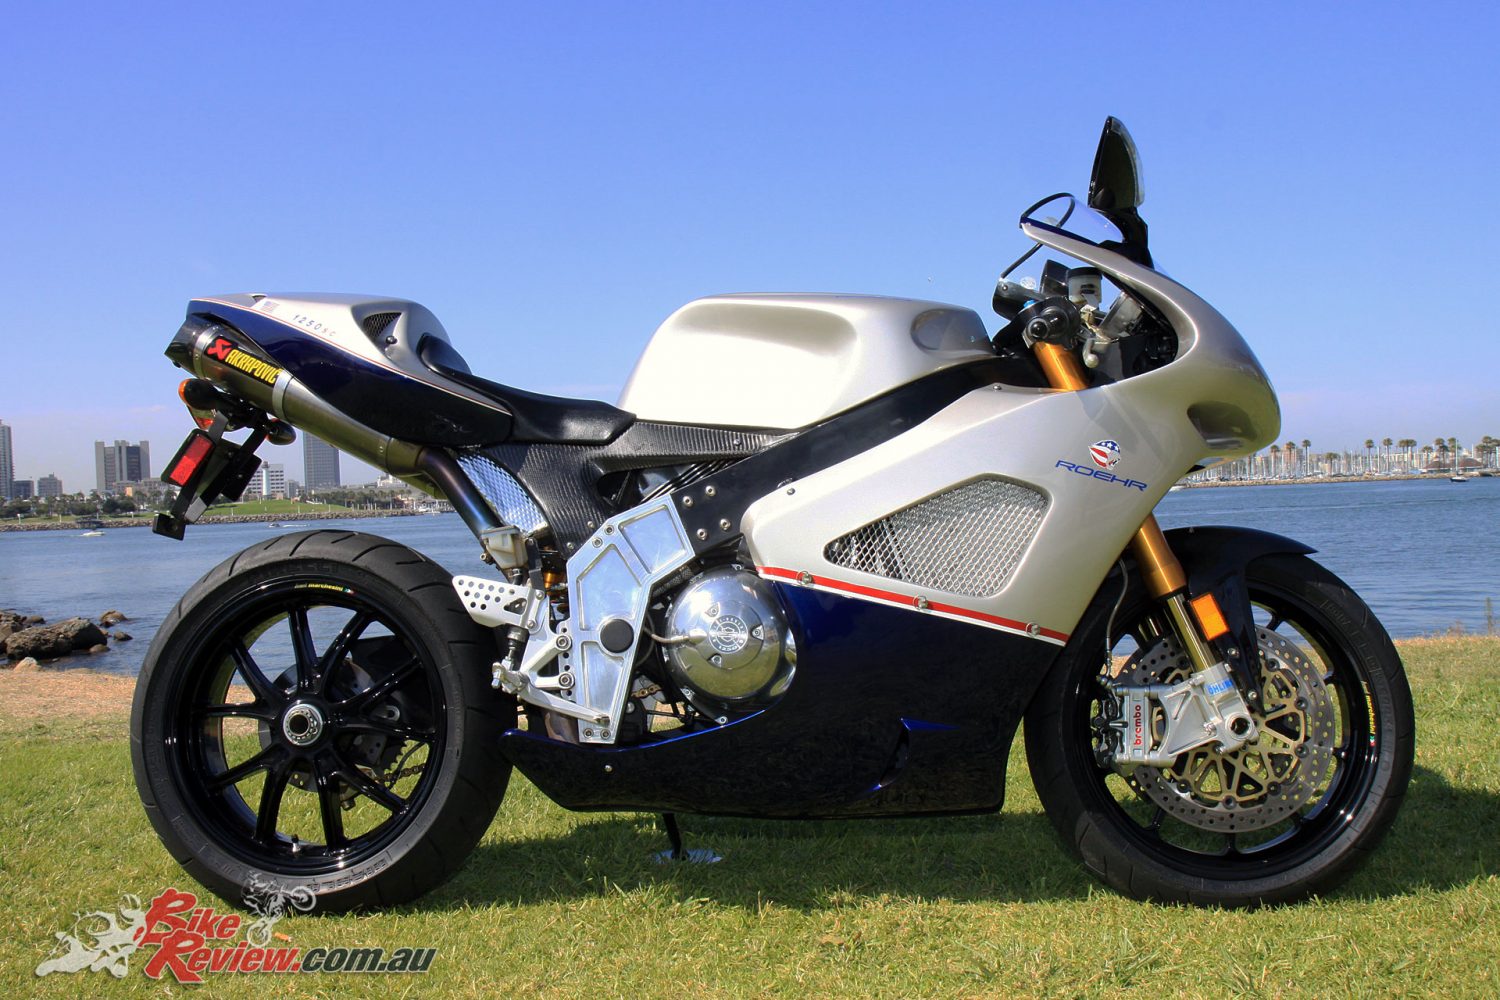 The all-American Roehr 1250sc Superbike